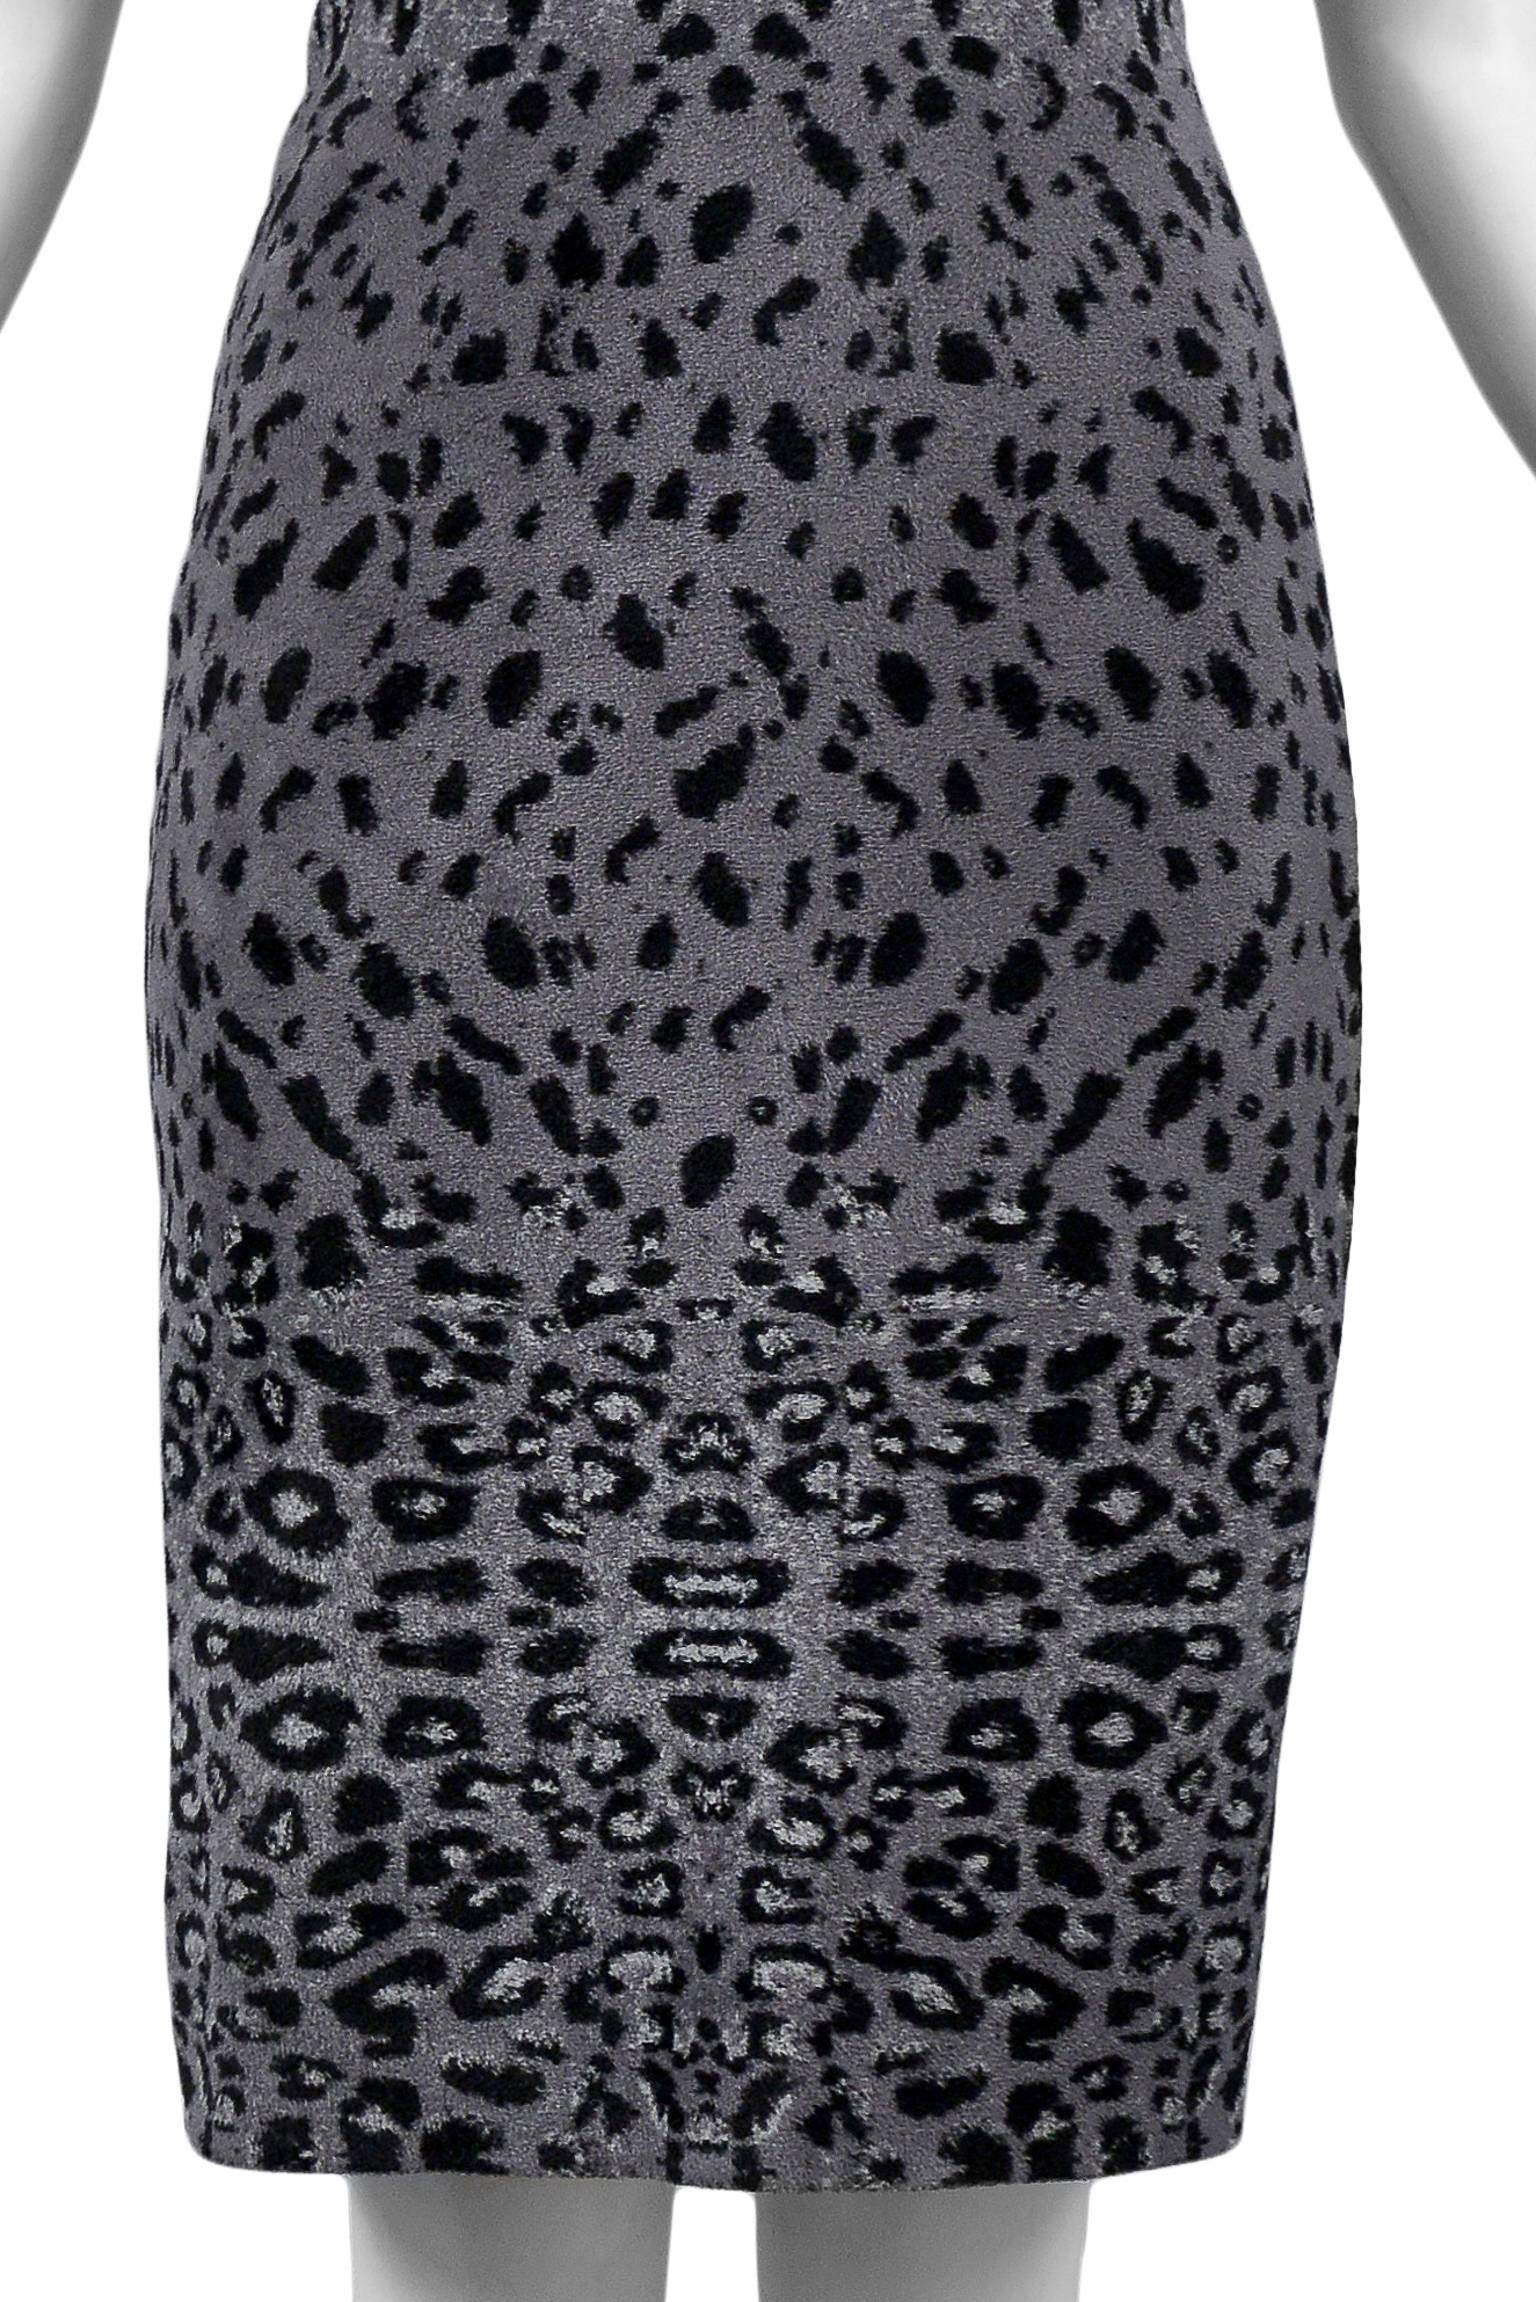 Iconic Azzedine Alaia Grey Leopard Bodycon Dress 2011 In Excellent Condition In Los Angeles, CA